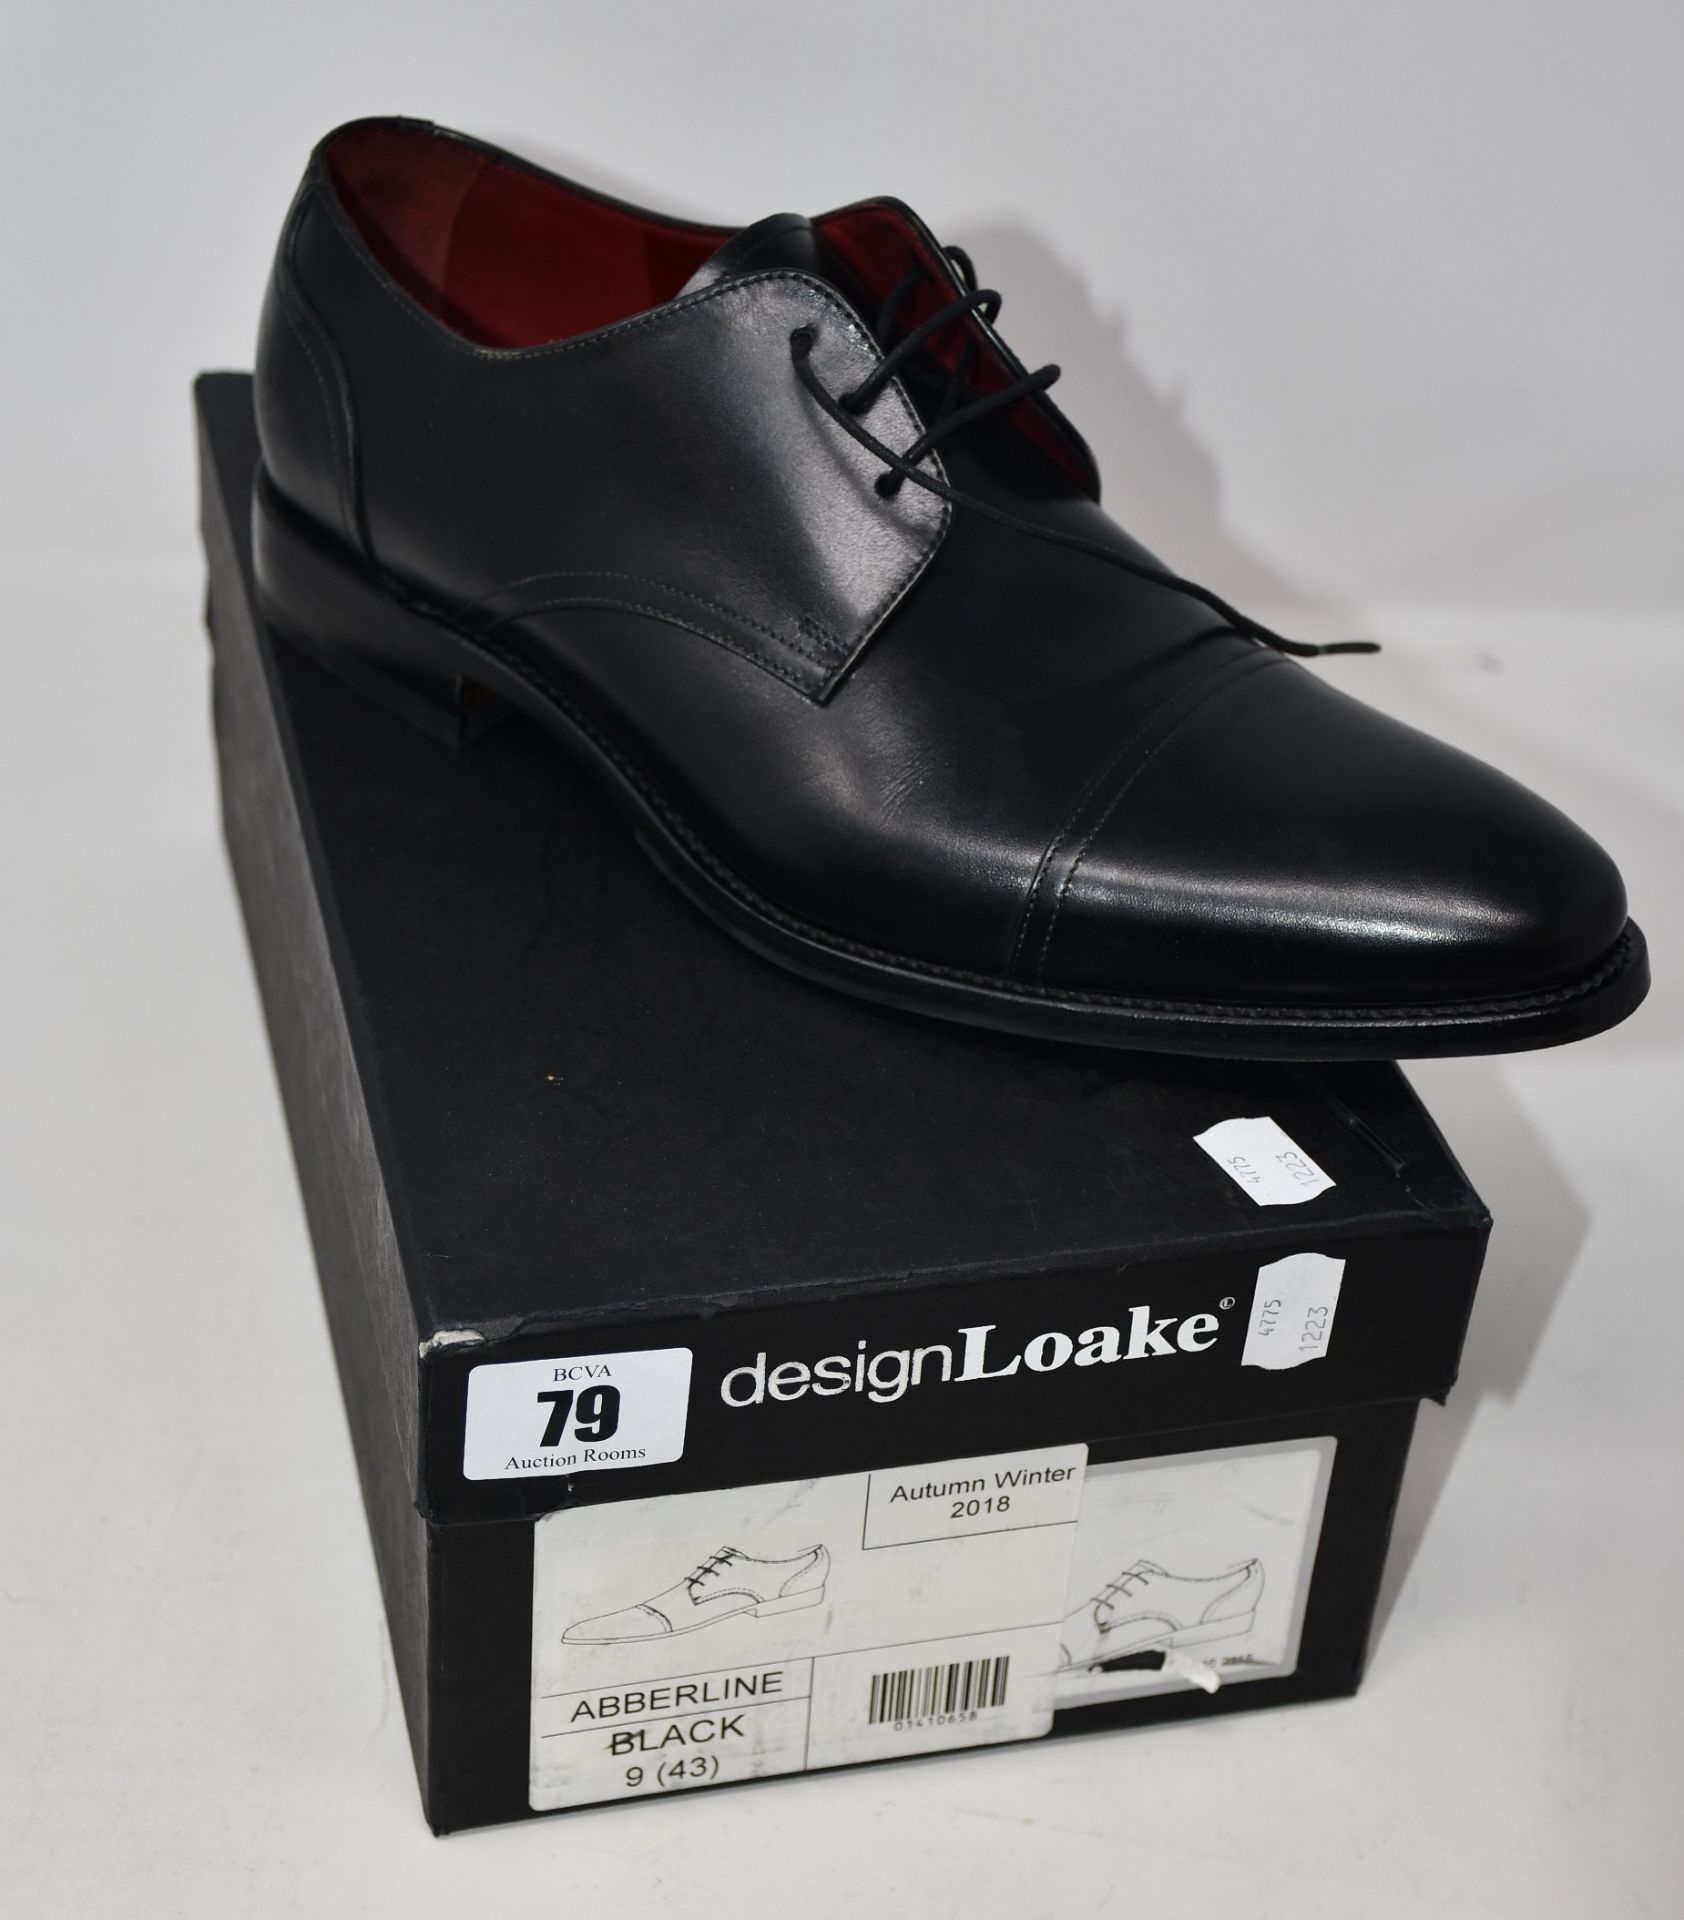 A pair of as new Loake Abberline shoes in black (UK 9 - RRP £175).